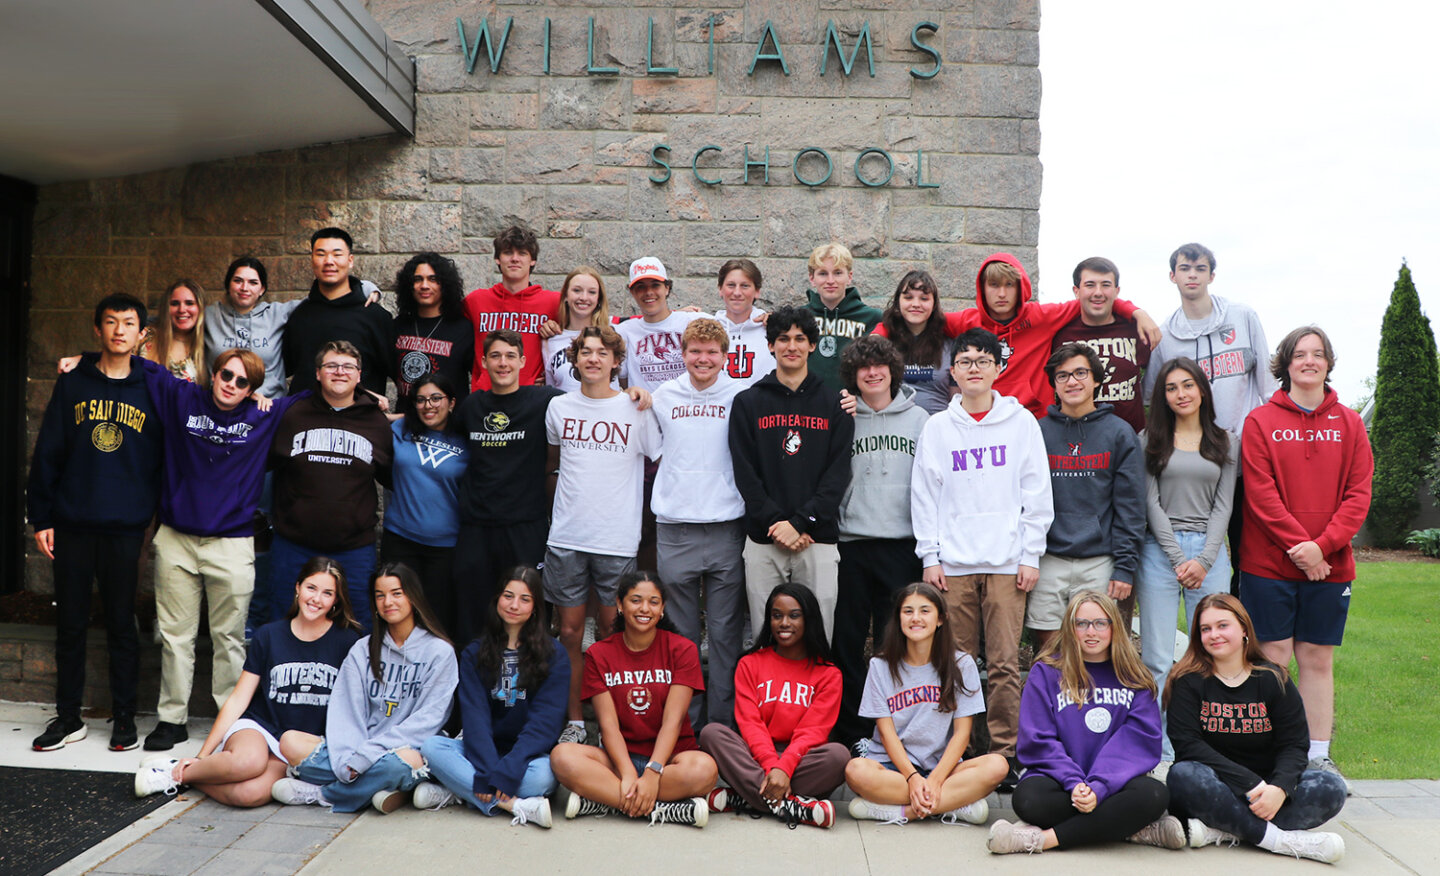 Williams School students pose in front of the school building in the clothes of their favorite colleges